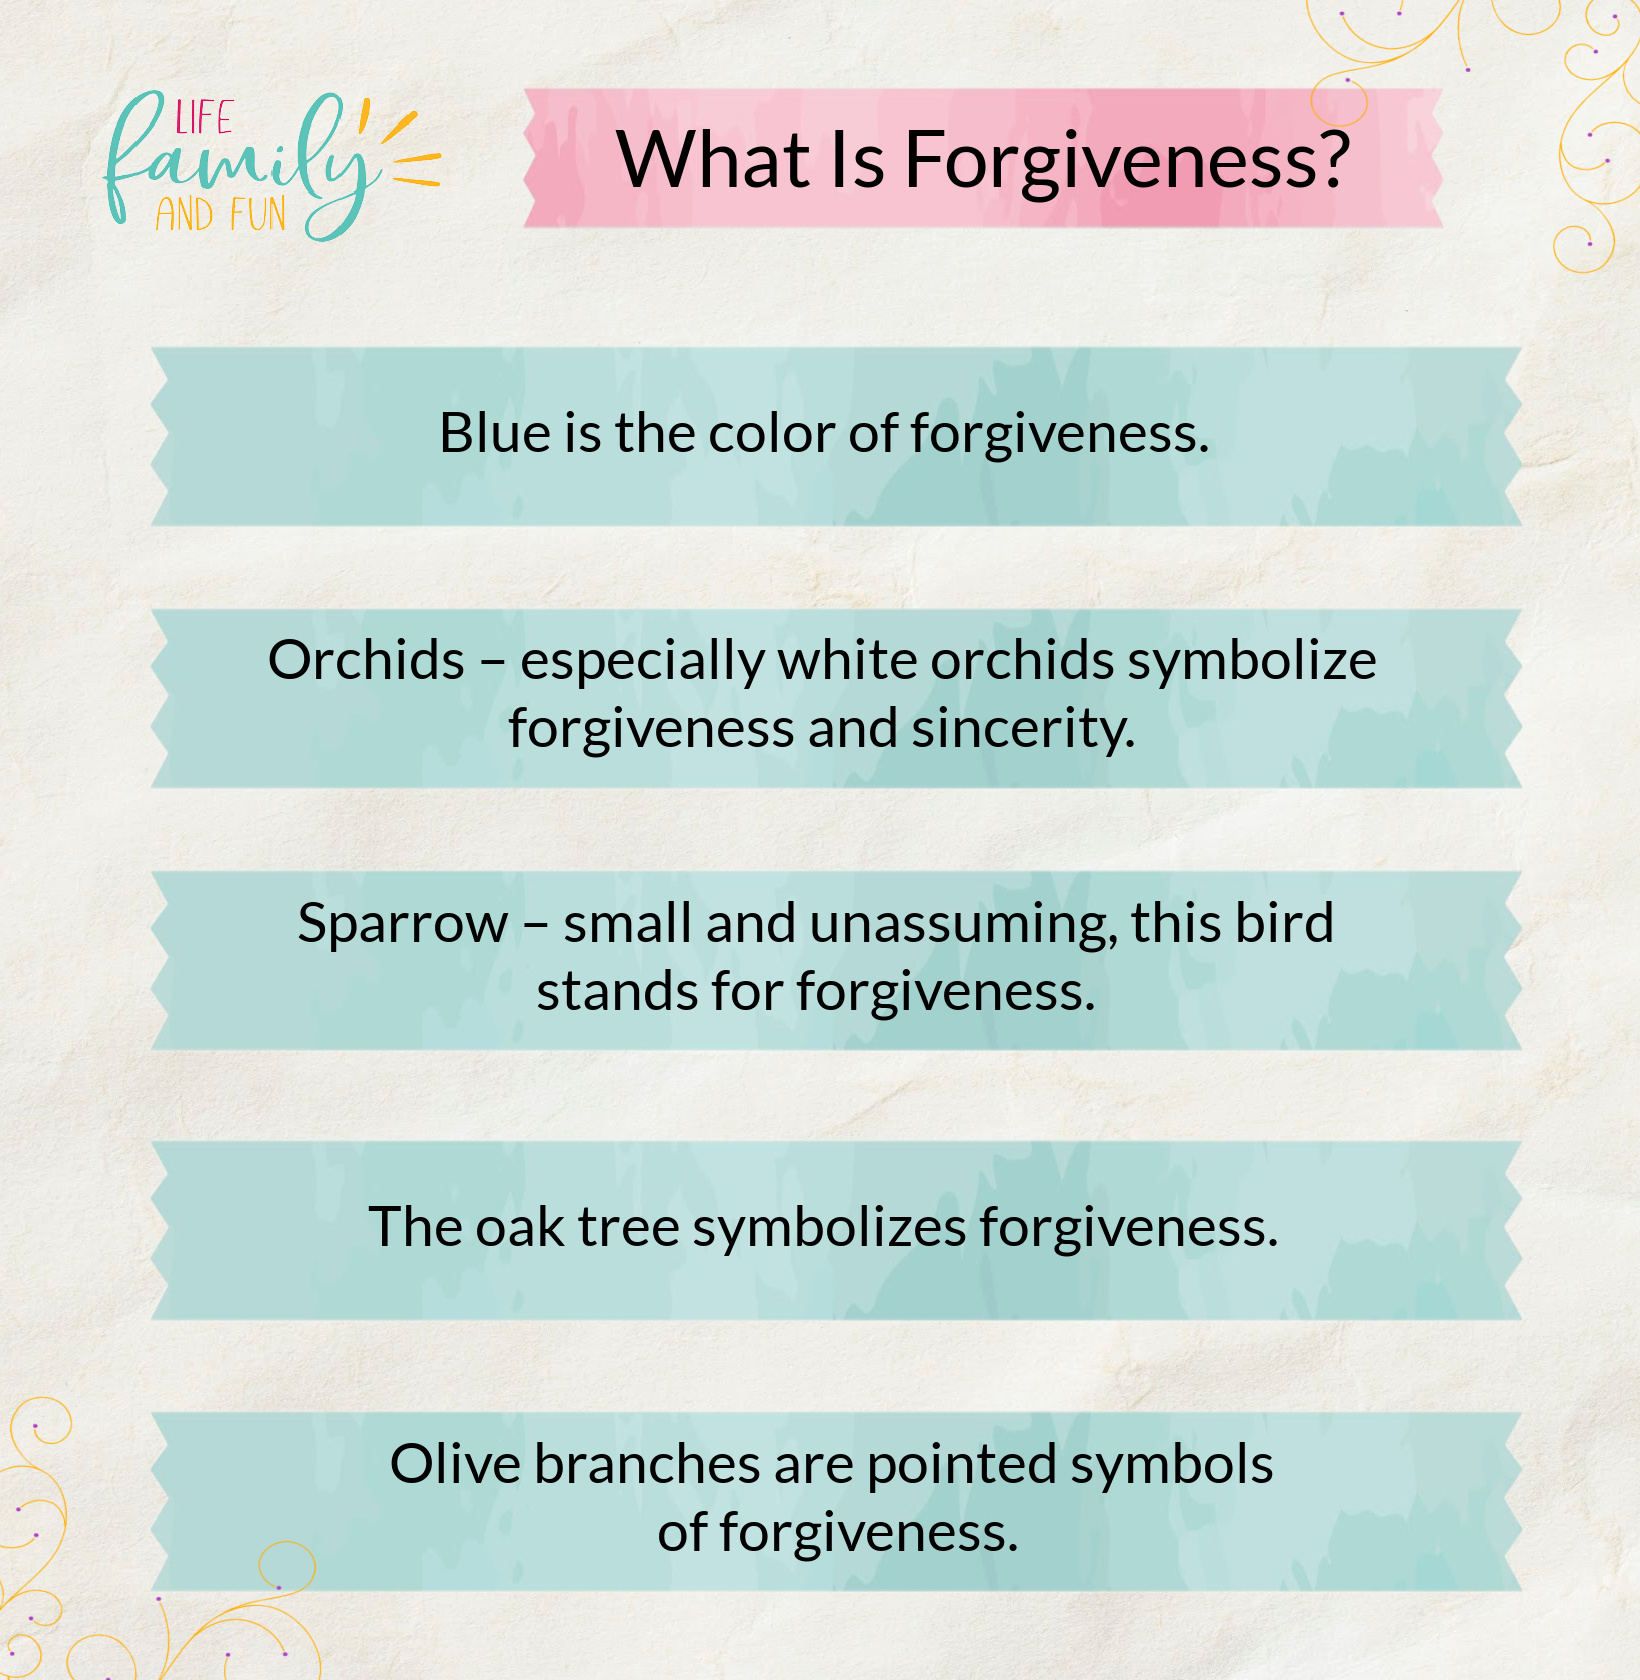 What Is Forgiveness?